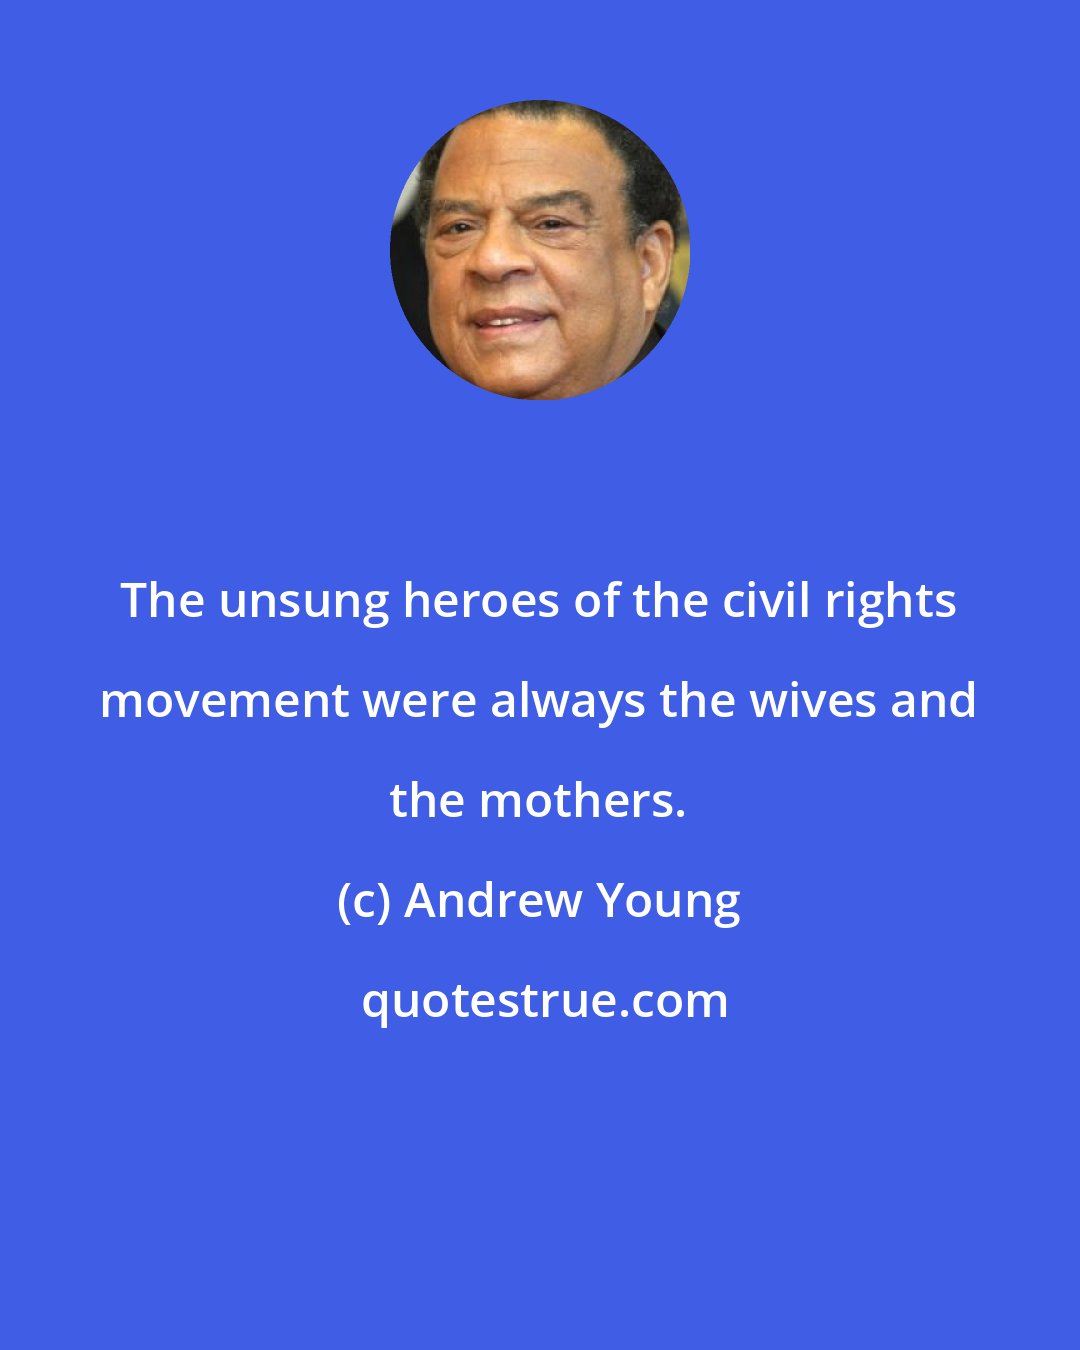 Andrew Young: The unsung heroes of the civil rights movement were always the wives and the mothers.